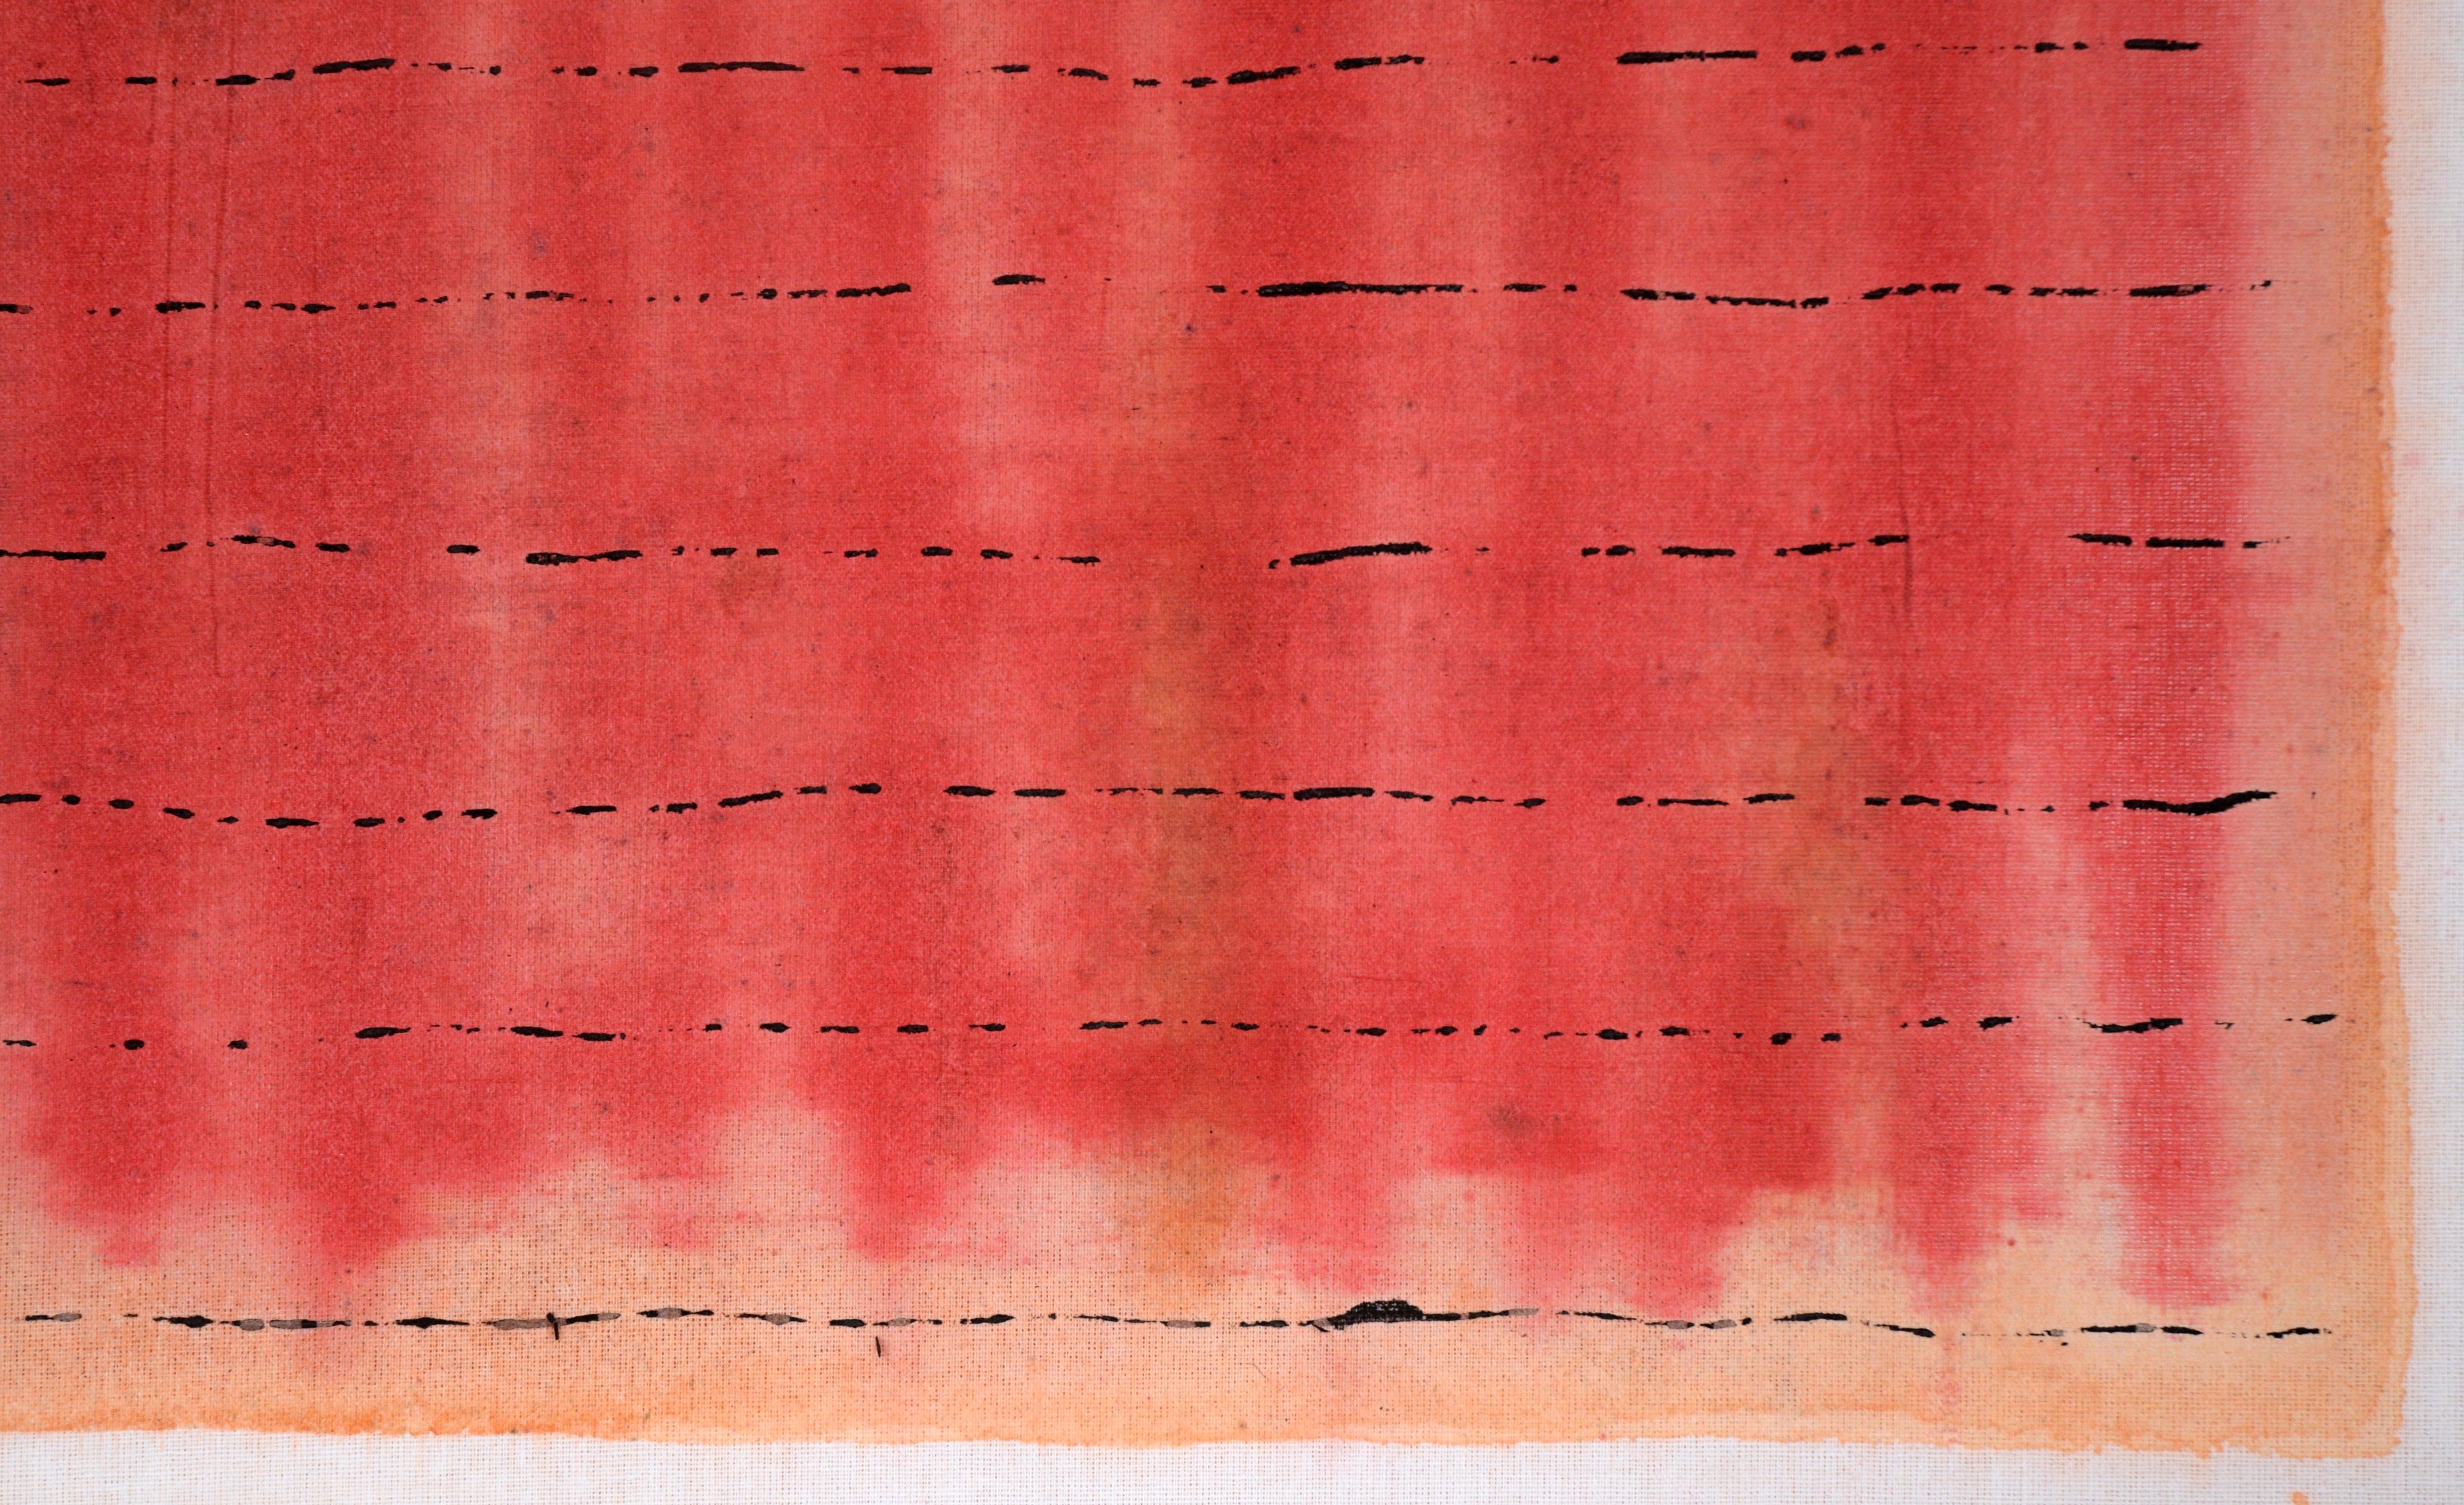 Black Lines Across a Red Field - Abstract Composition on Starched Linen For Sale 2